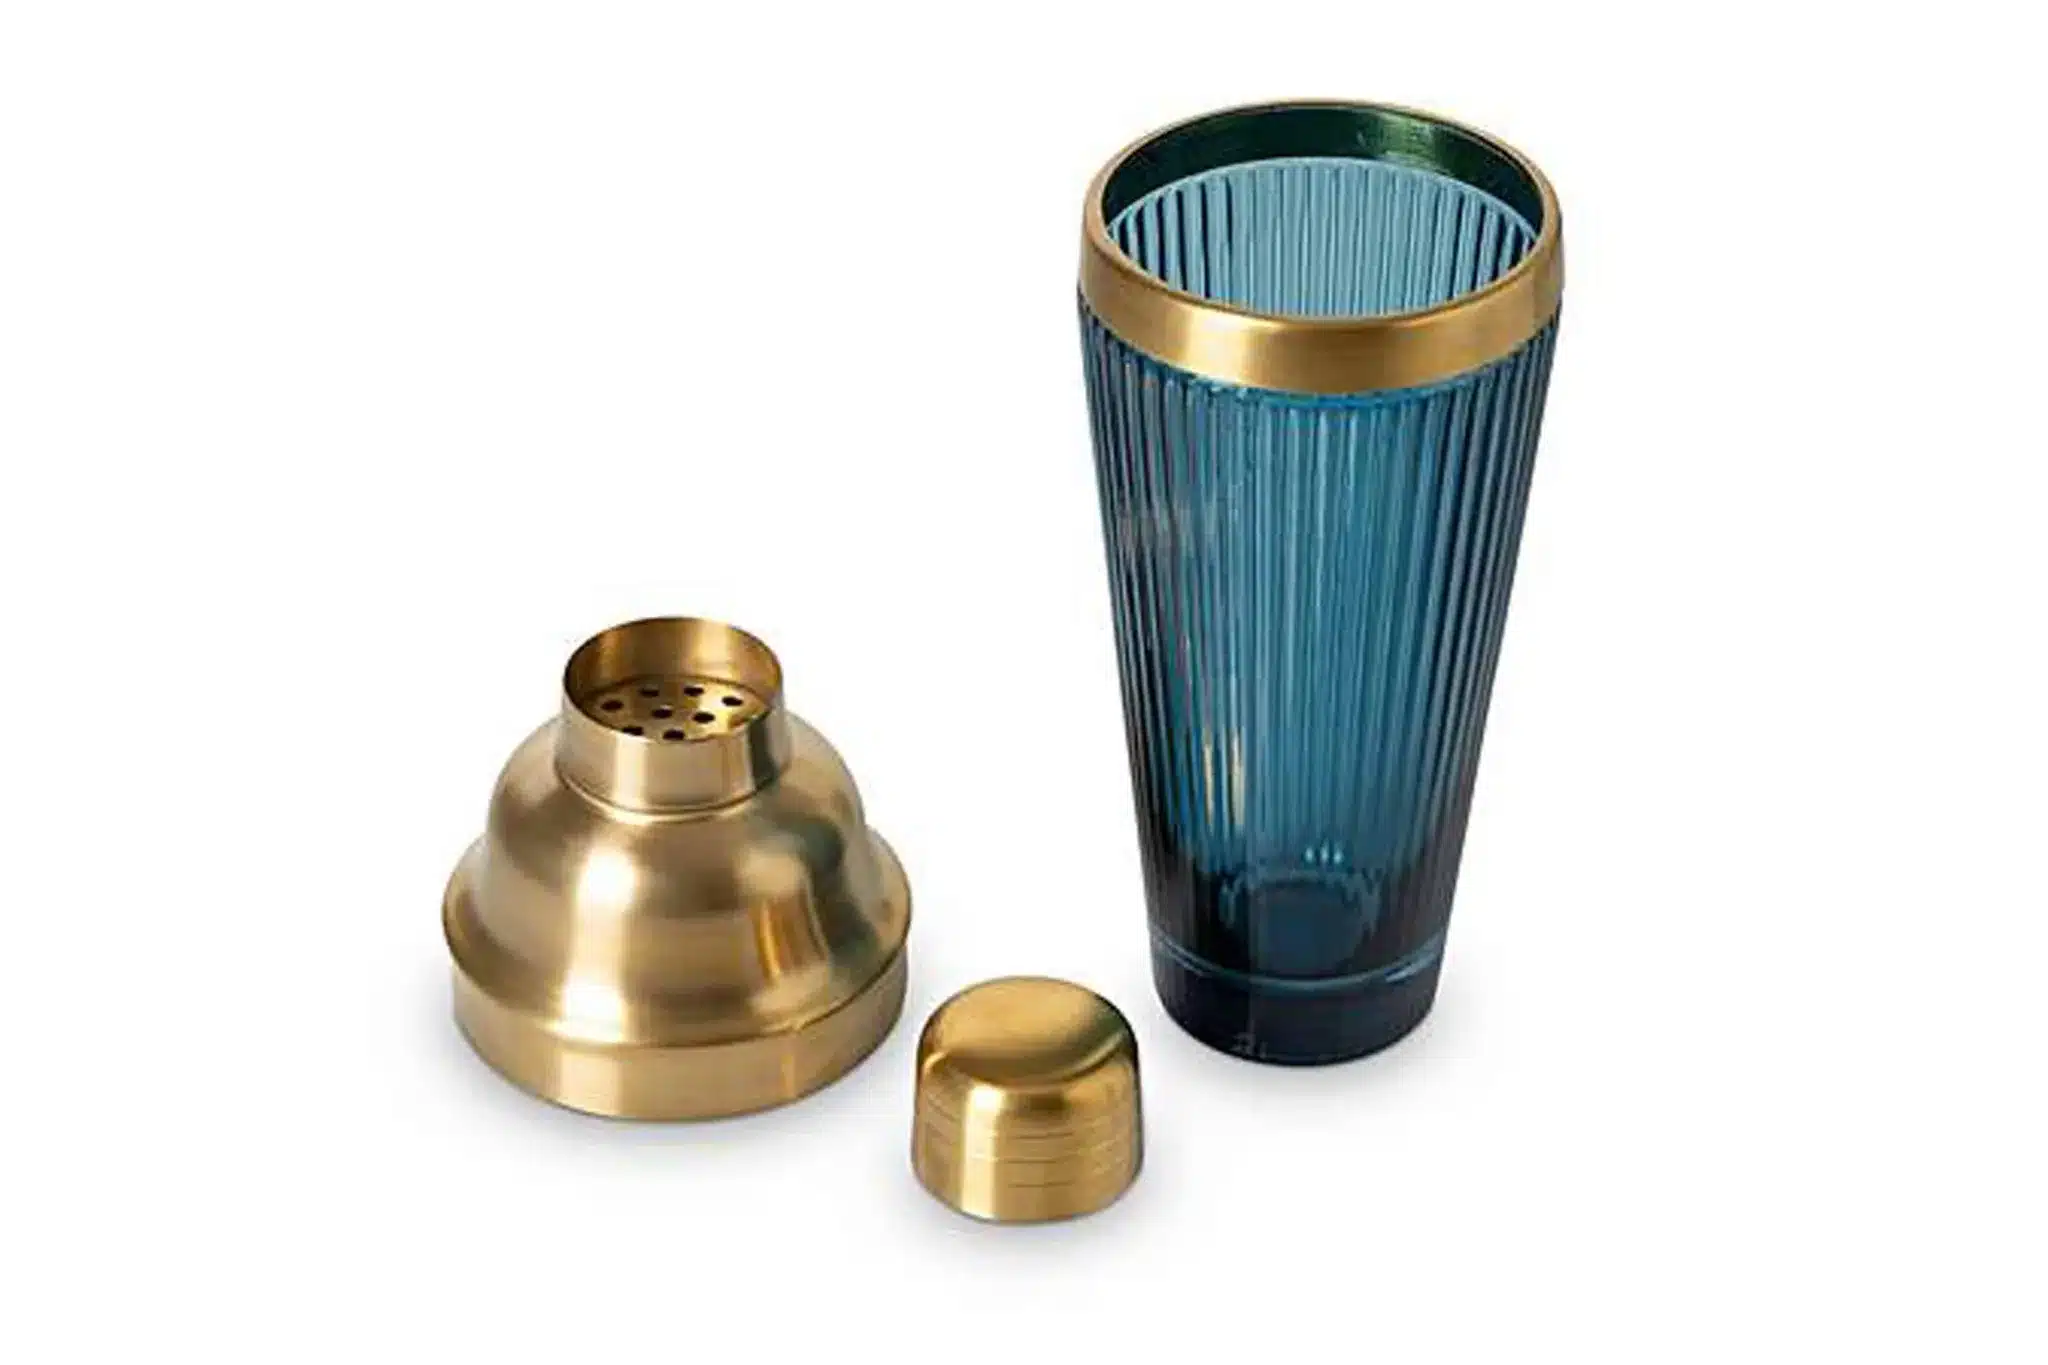 The perfect Christmas Gift for a Foodies, the Iko Cocktail Shaker